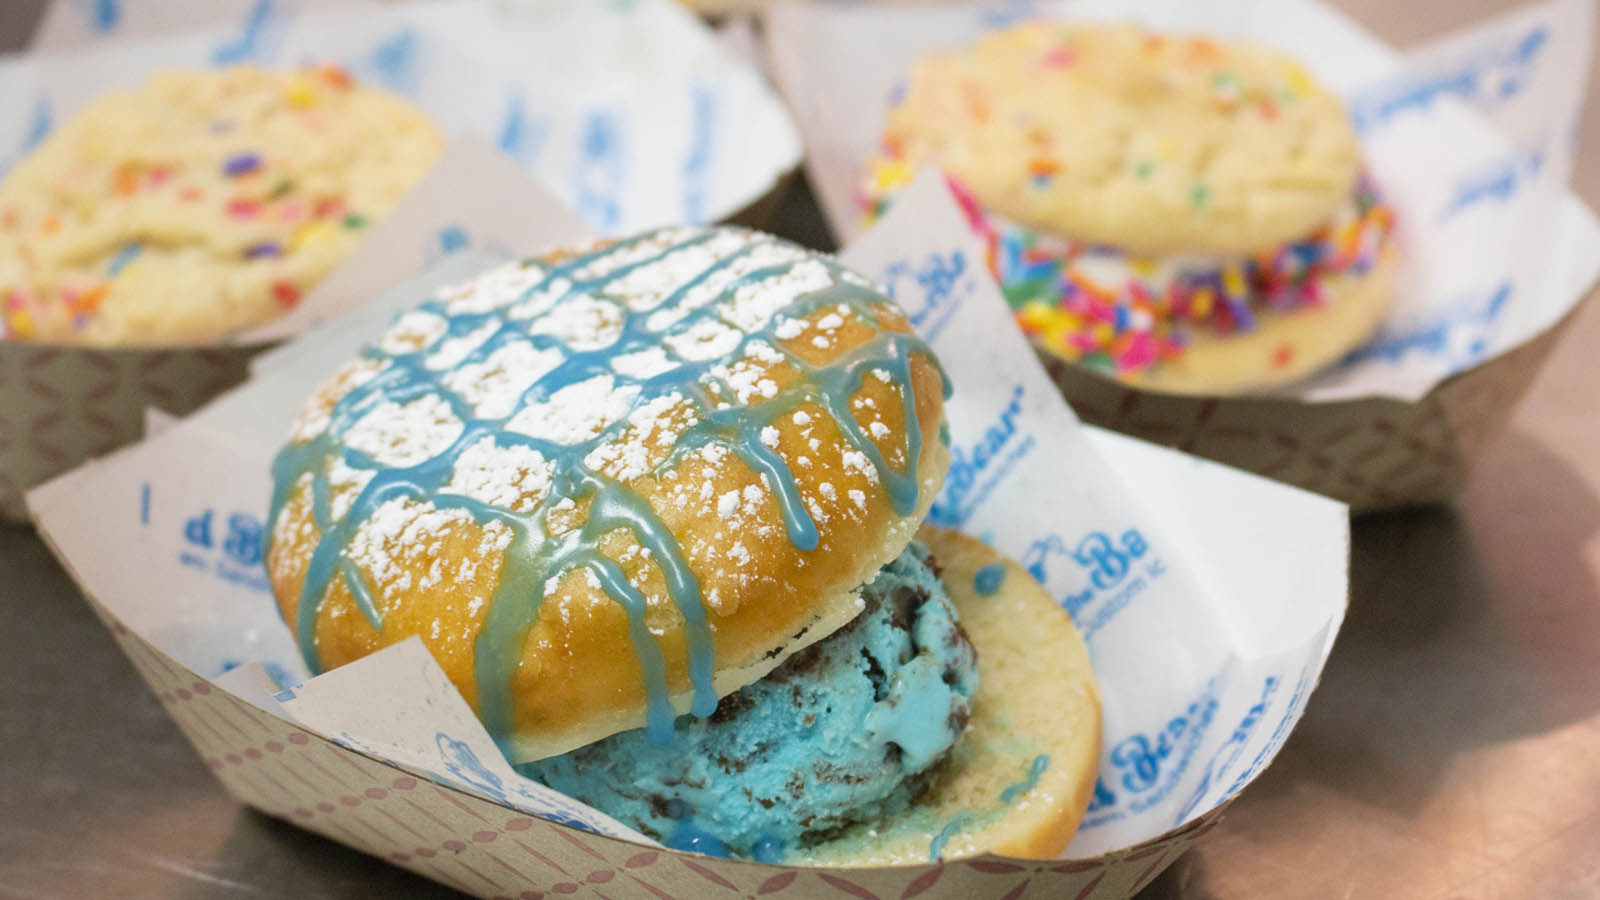 Sugarcoated The Baked Bear Delights With Its Flashy Decor And Dangerously Sweet Offerings Daily Bruin